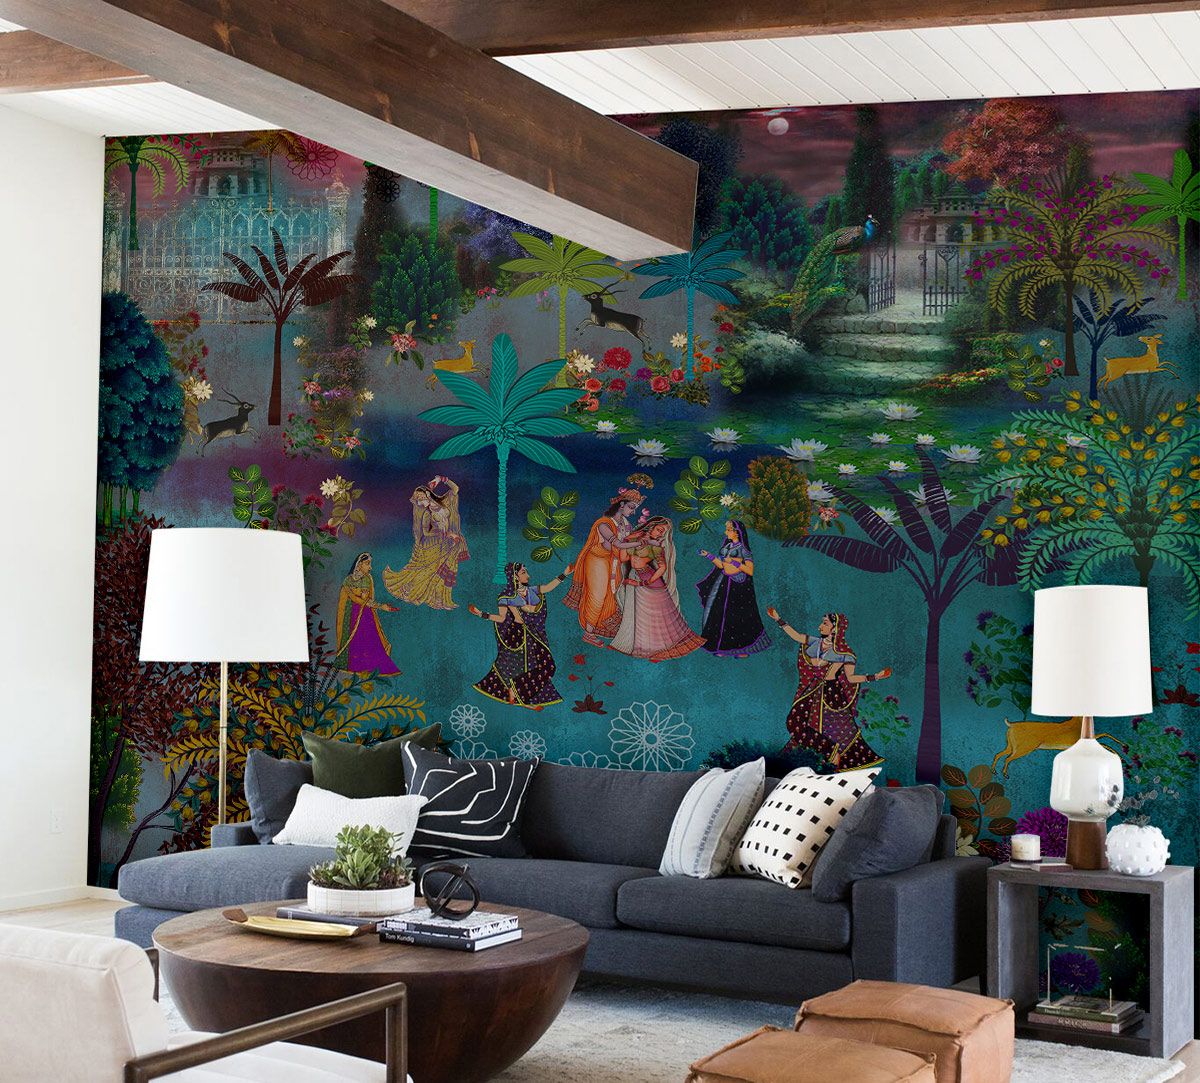 Wondrous wallpapers: Enhancing your home decor one wall at a time